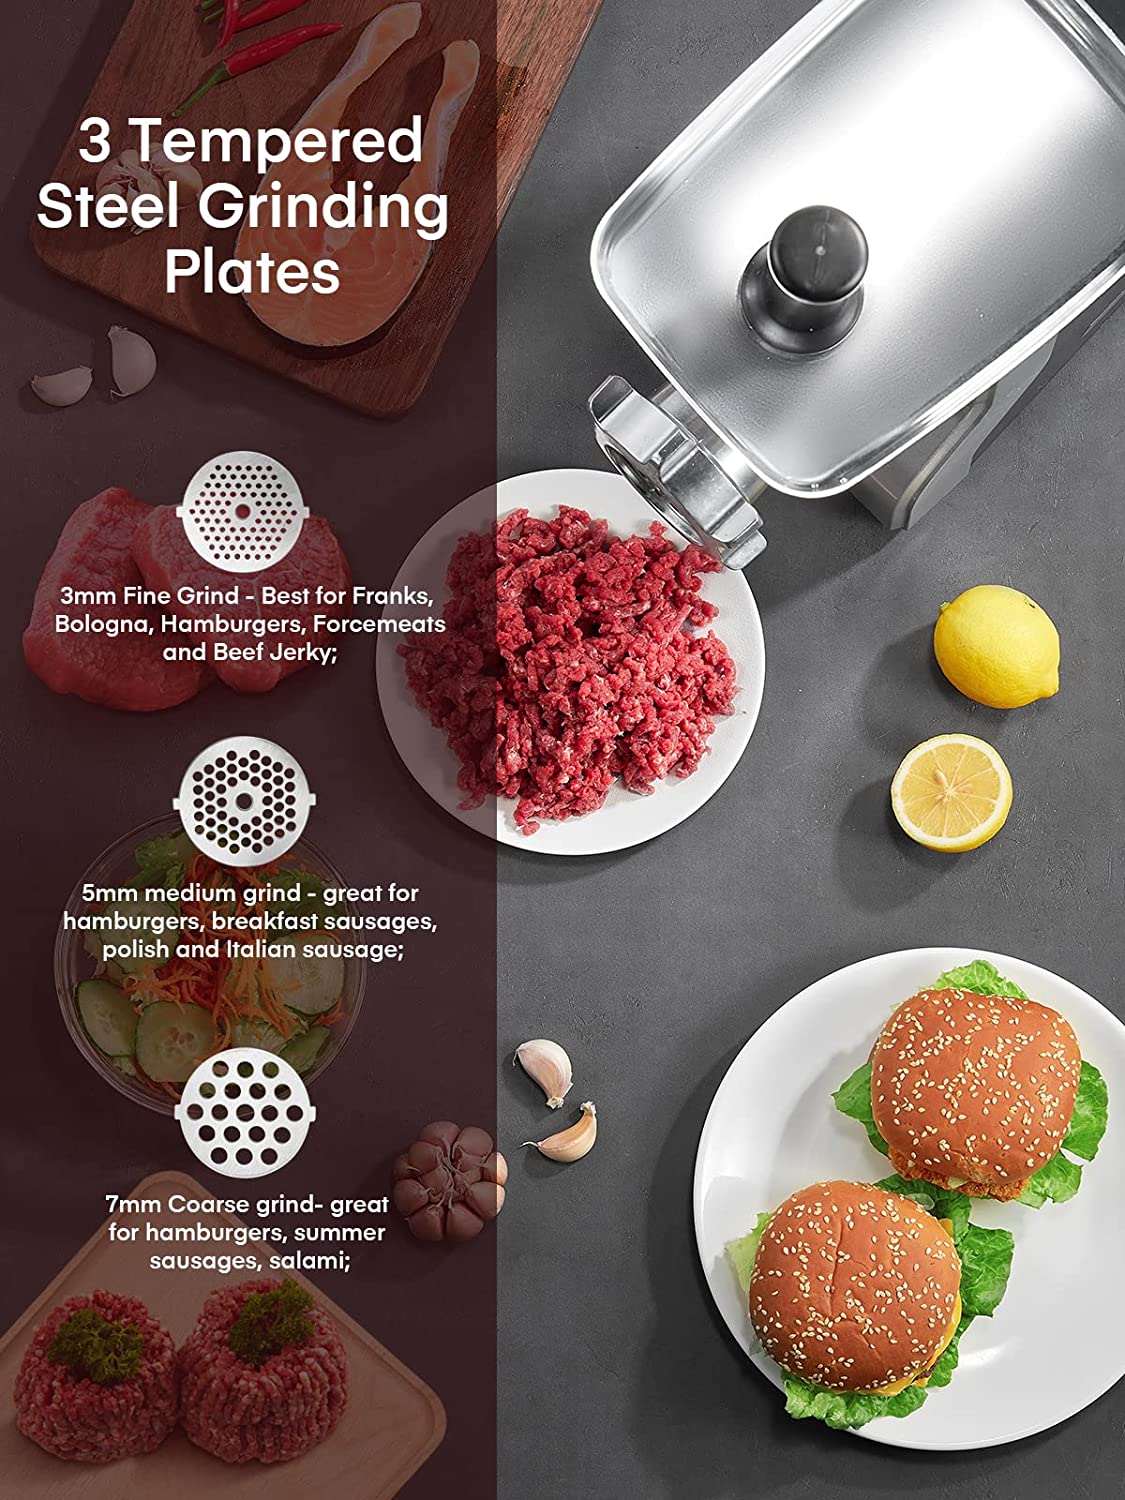 3 tempered steel grinding plates, Electric Meat Grinder Heavy Duty - 5 in 1 2500W Max Powerful Home Food Grinder - Sausage Stuffer - Slicer/Shredder/Grater - Kubbe & Tomato Juicing Kits - 3 Stainless Steel Grinding Plates - Size #12